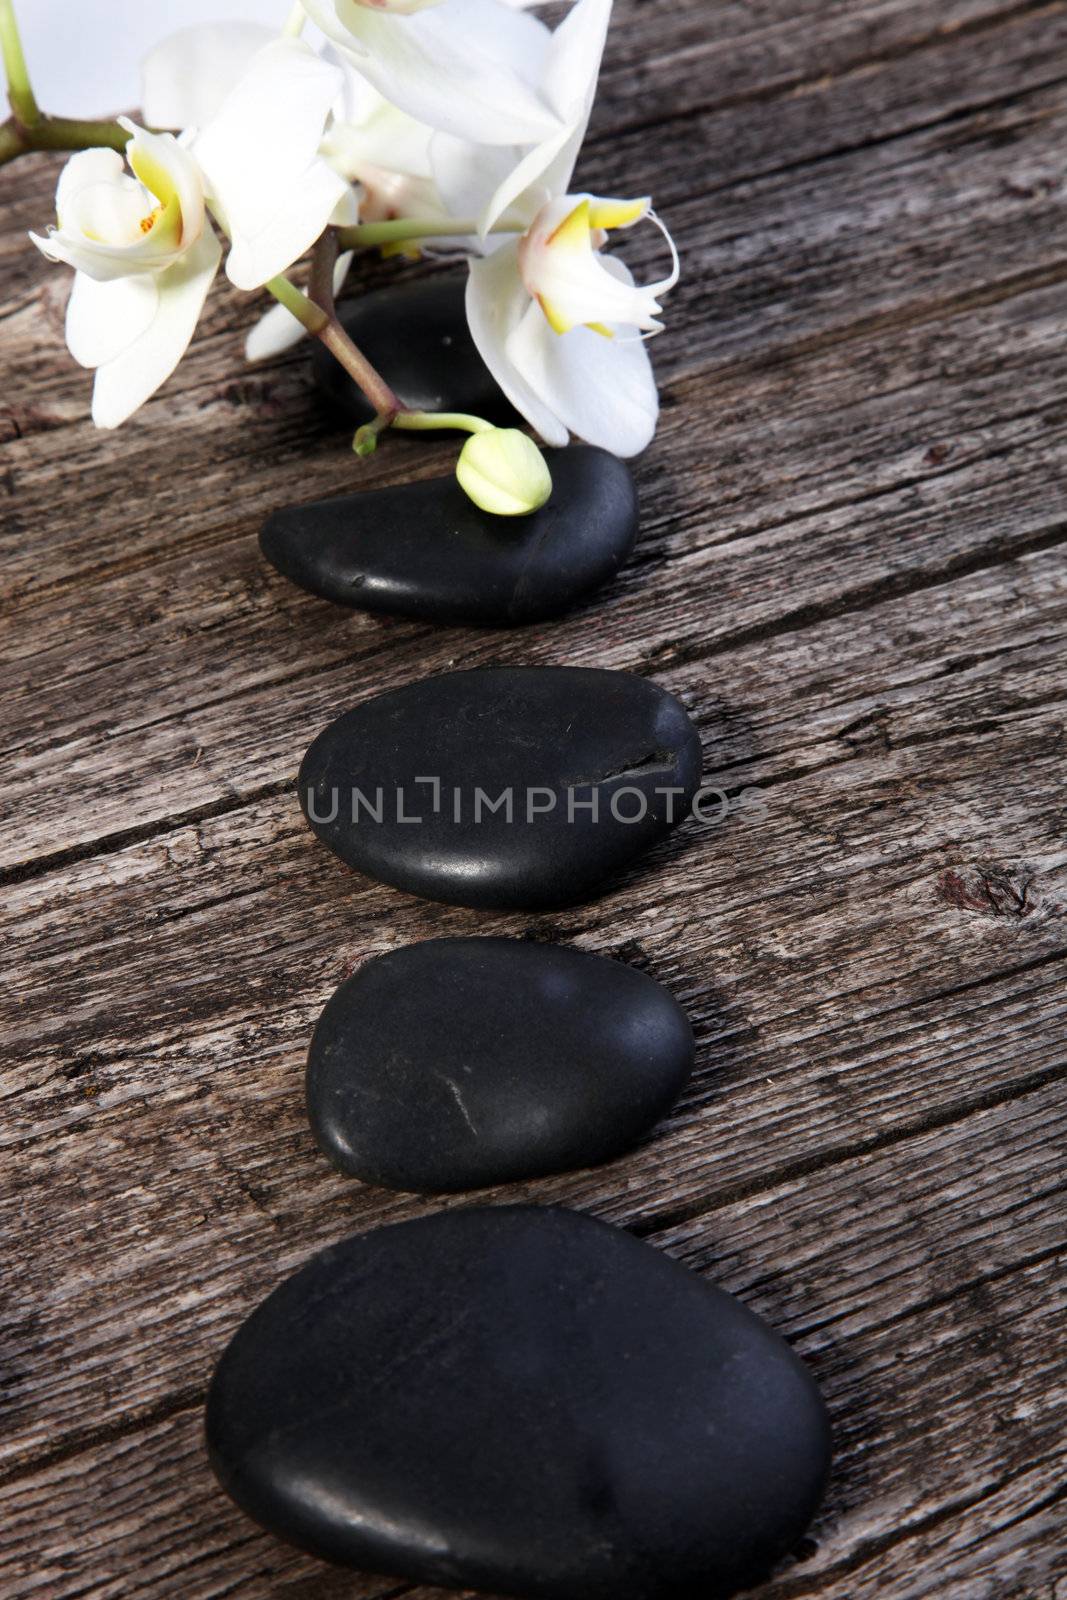 Spa arrangement with therapeutic zen stones and white flowers